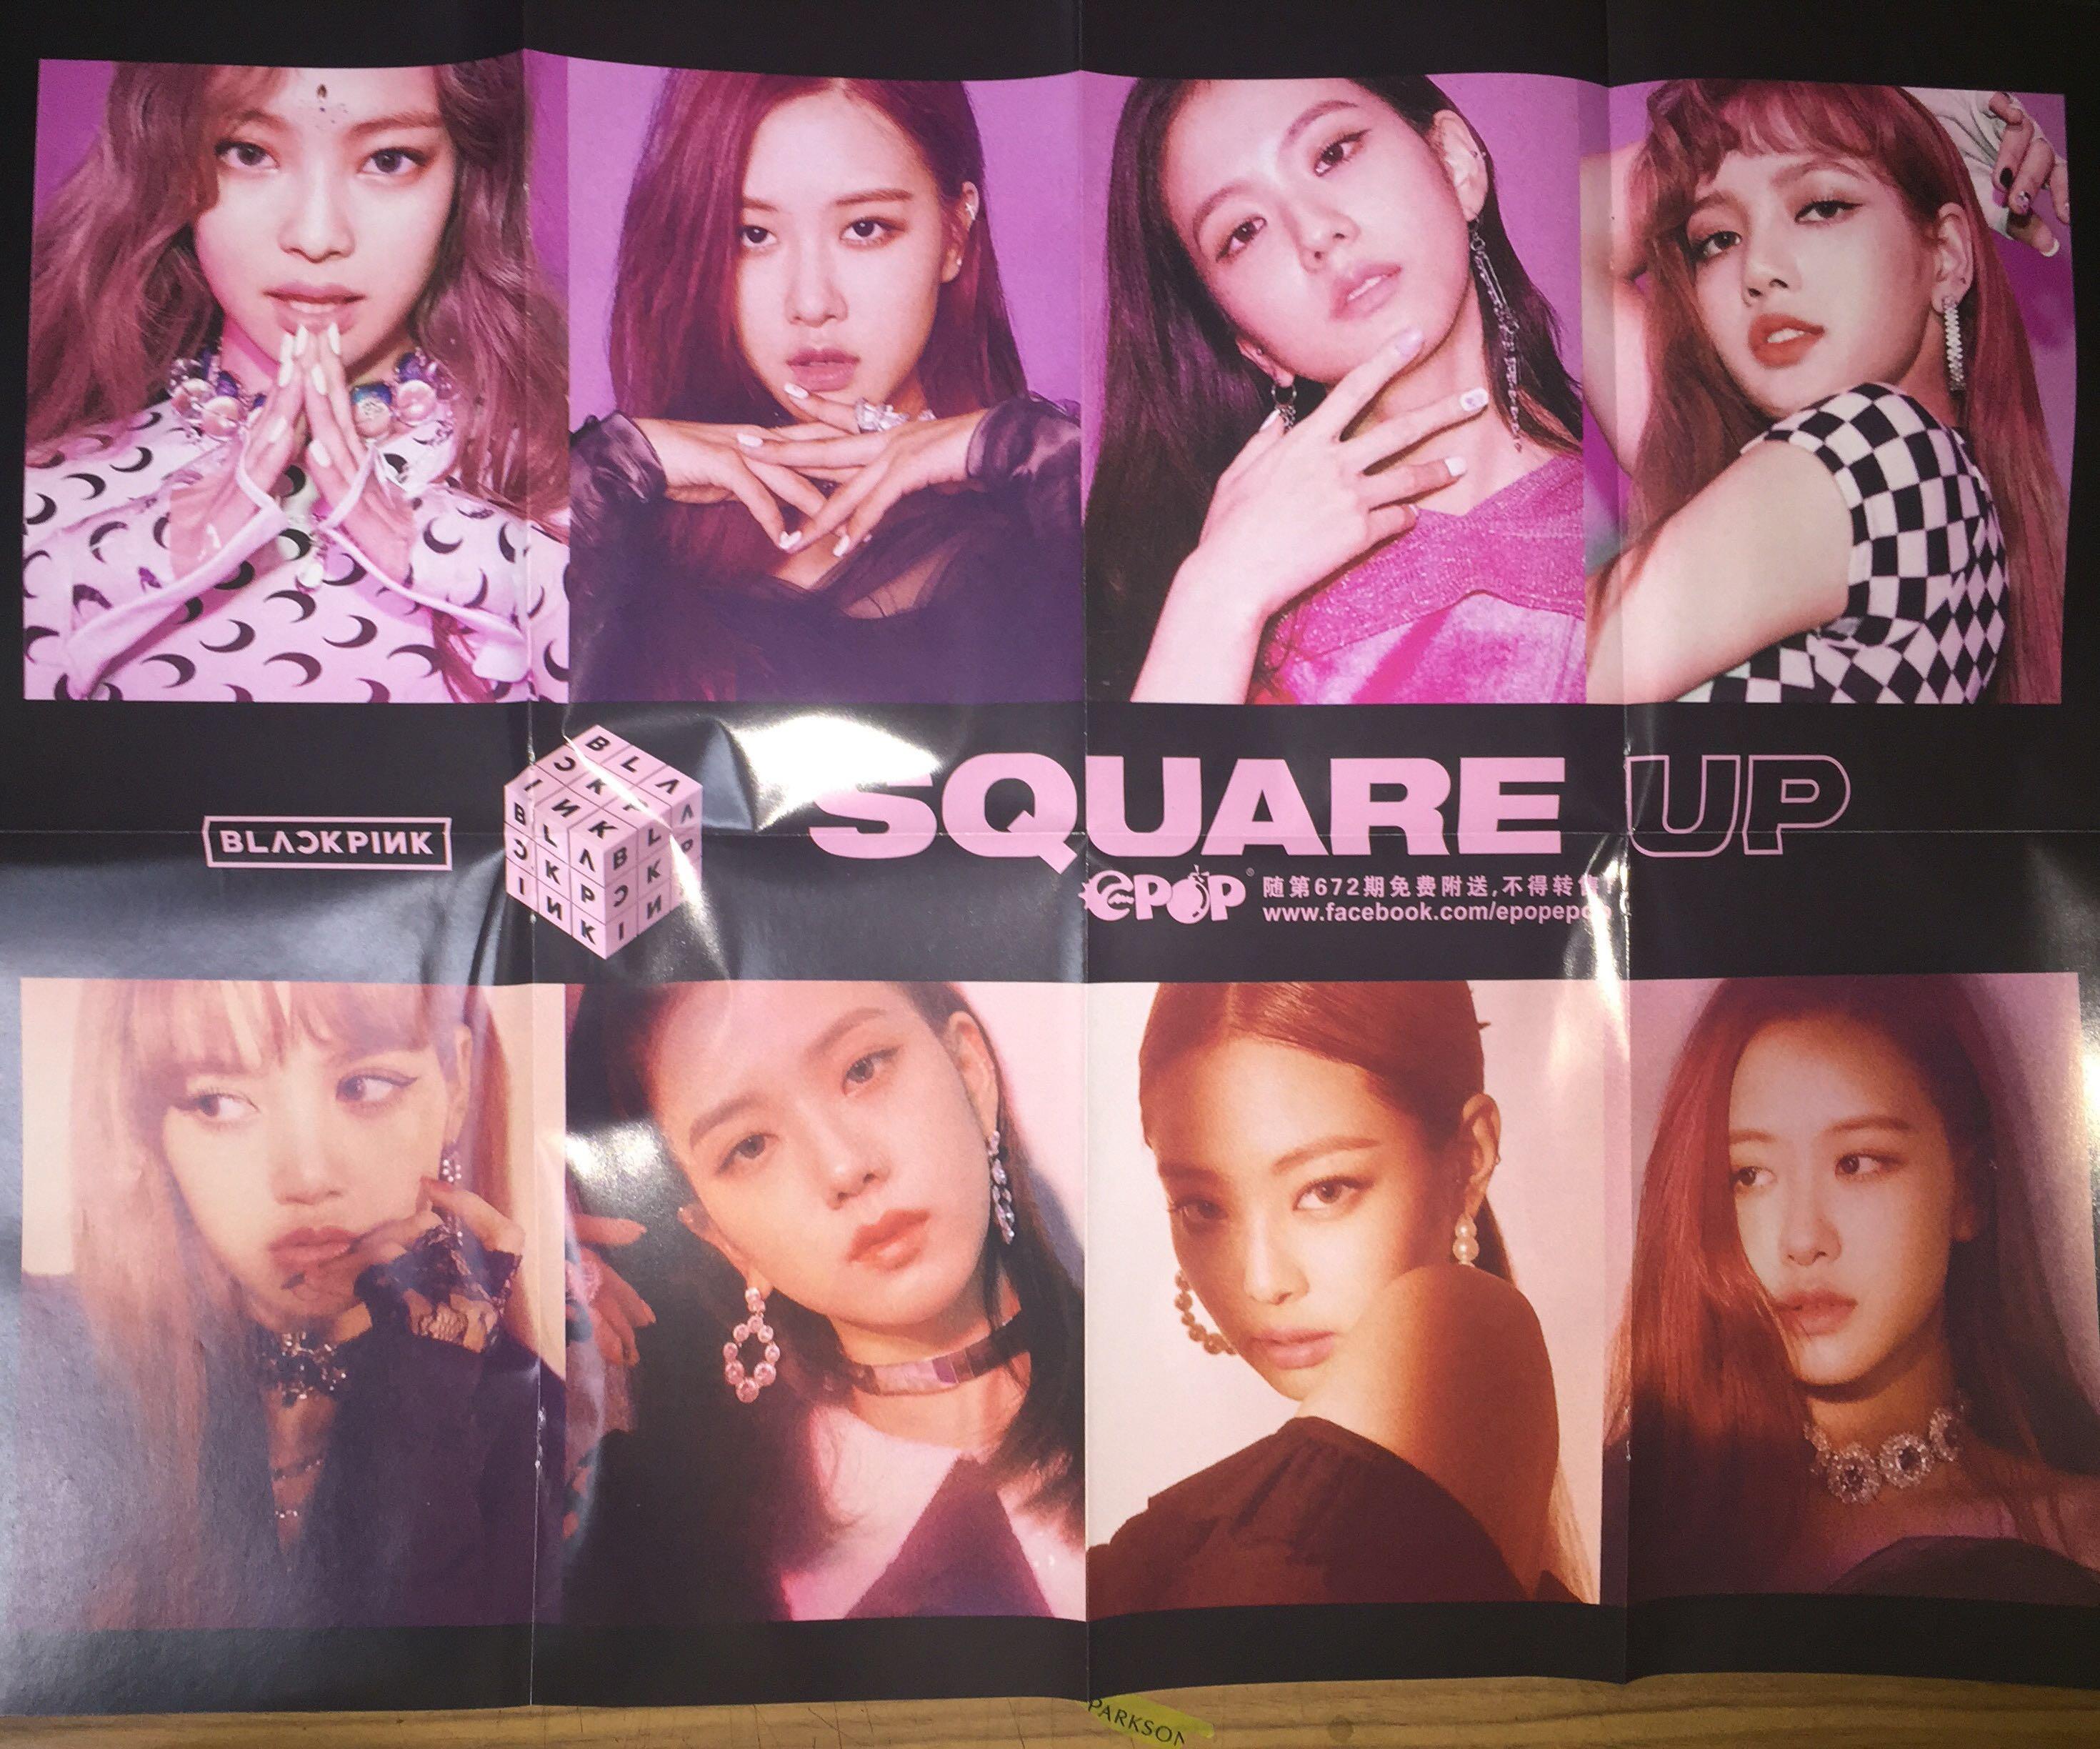 blackpink : epop square up poster (all members)